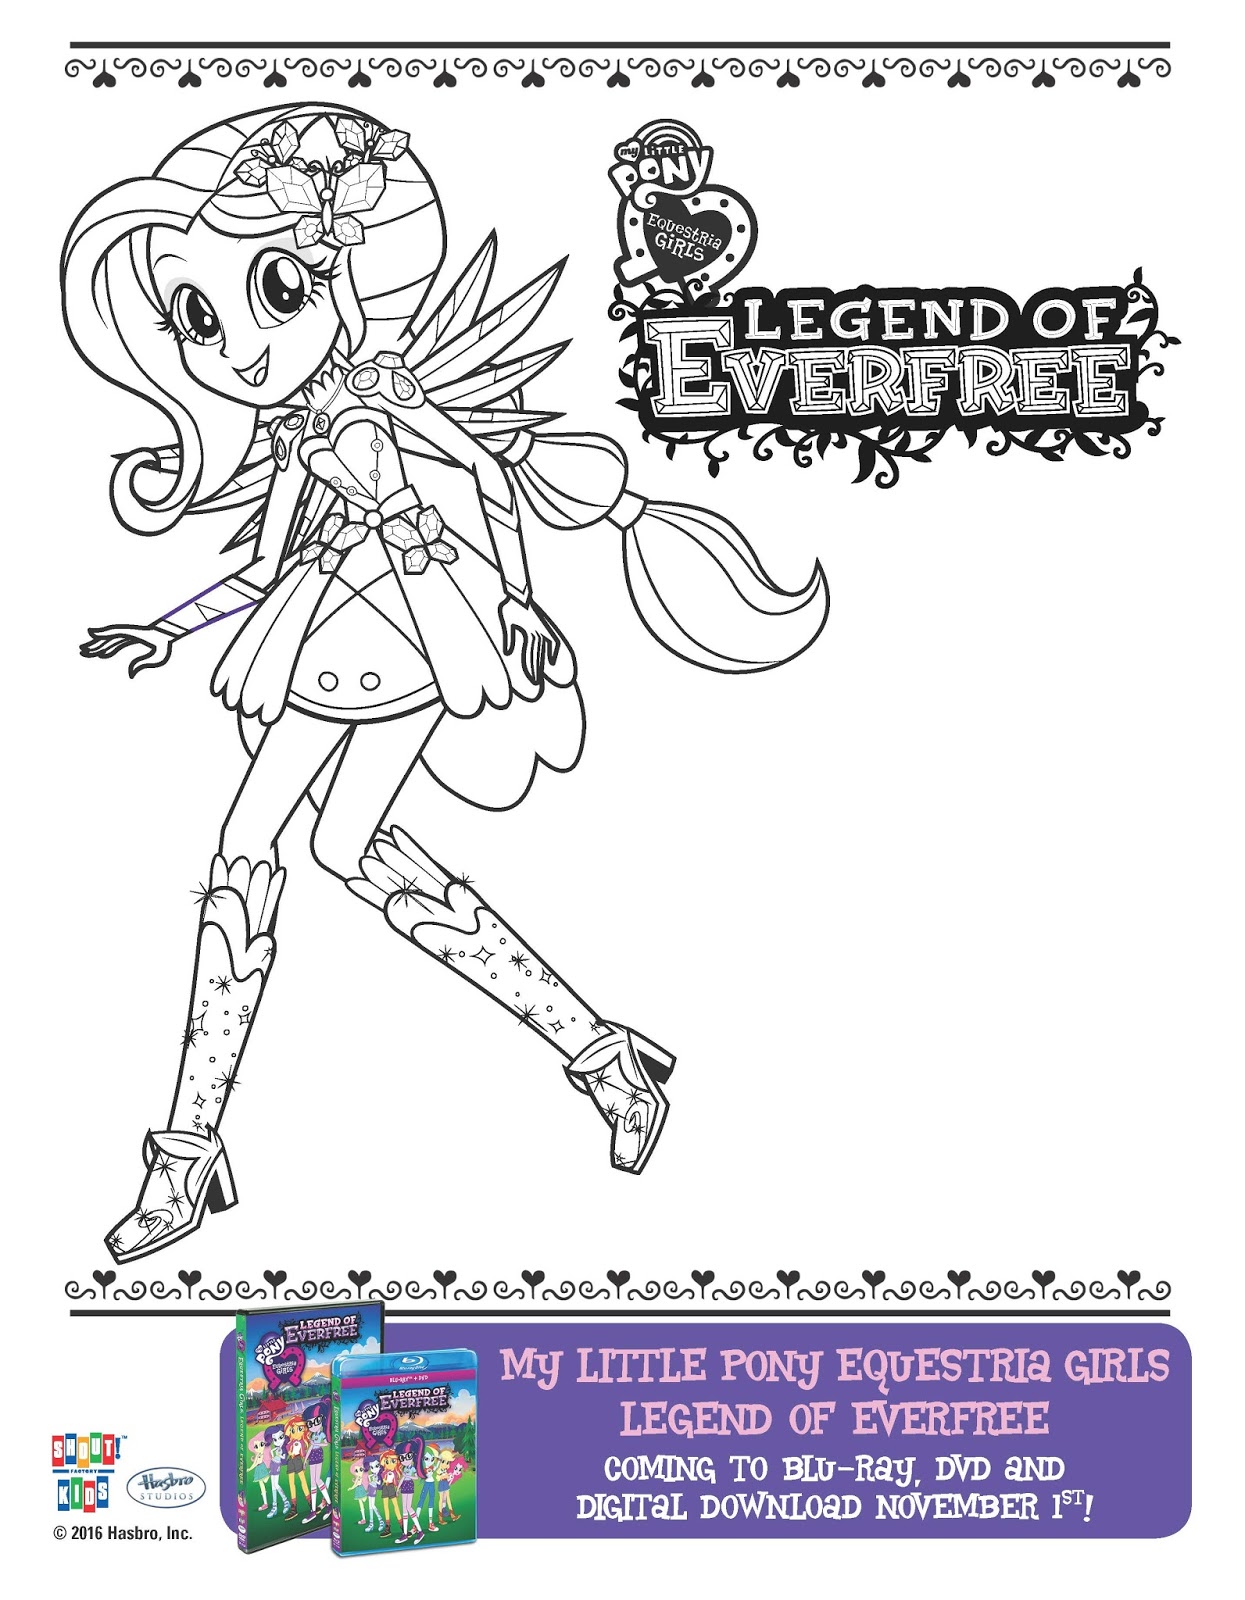 Coupon Savvy Sarah: My Little Pony Equestria Girls - Legend Of Everfree  sets up camp on November 1, 2016 on Blu-ray, DVD and Digital Download!  #Giveaway Ends 11/1